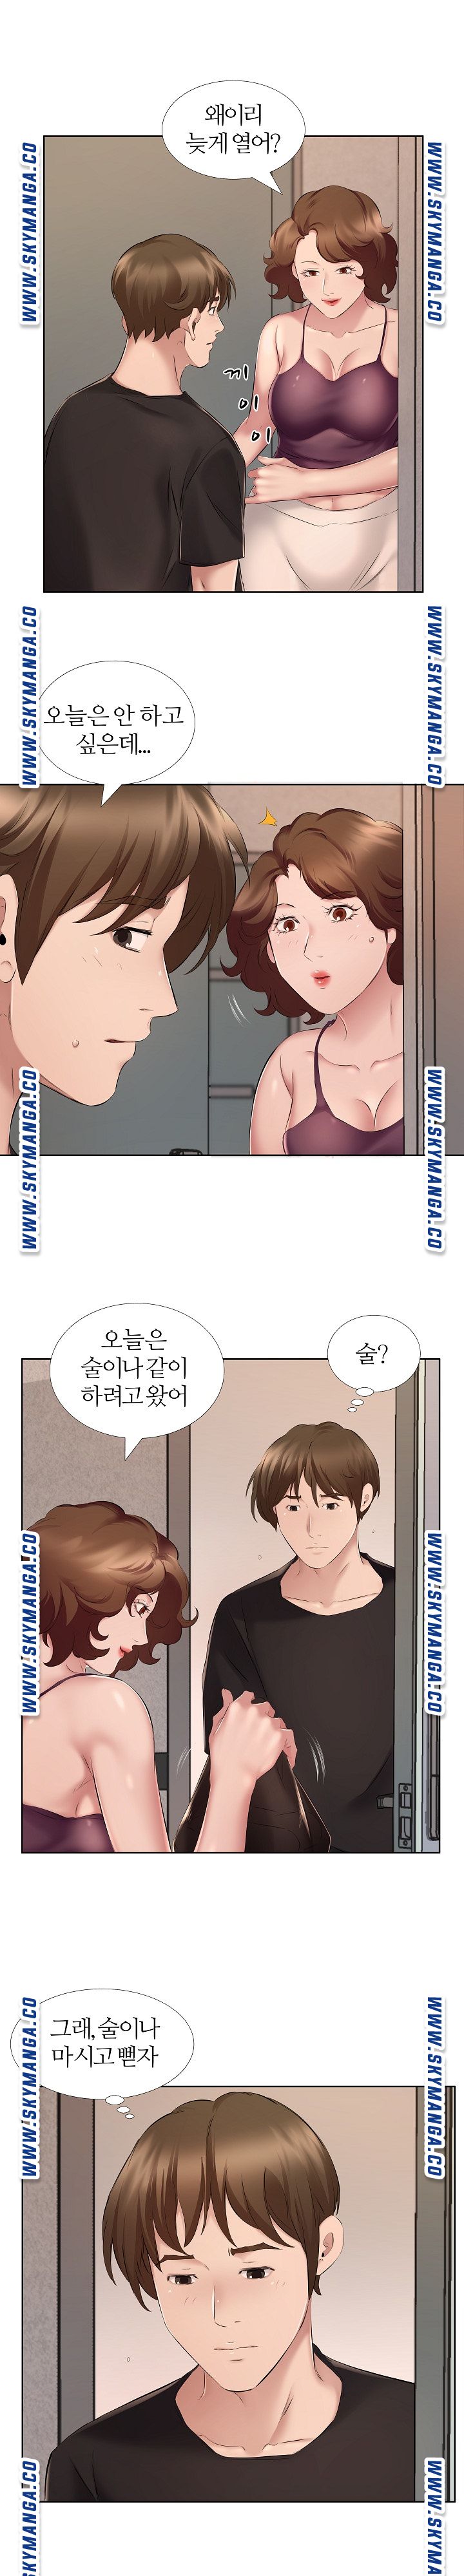 One Room Hotel Raw - Chapter 8 Page 8